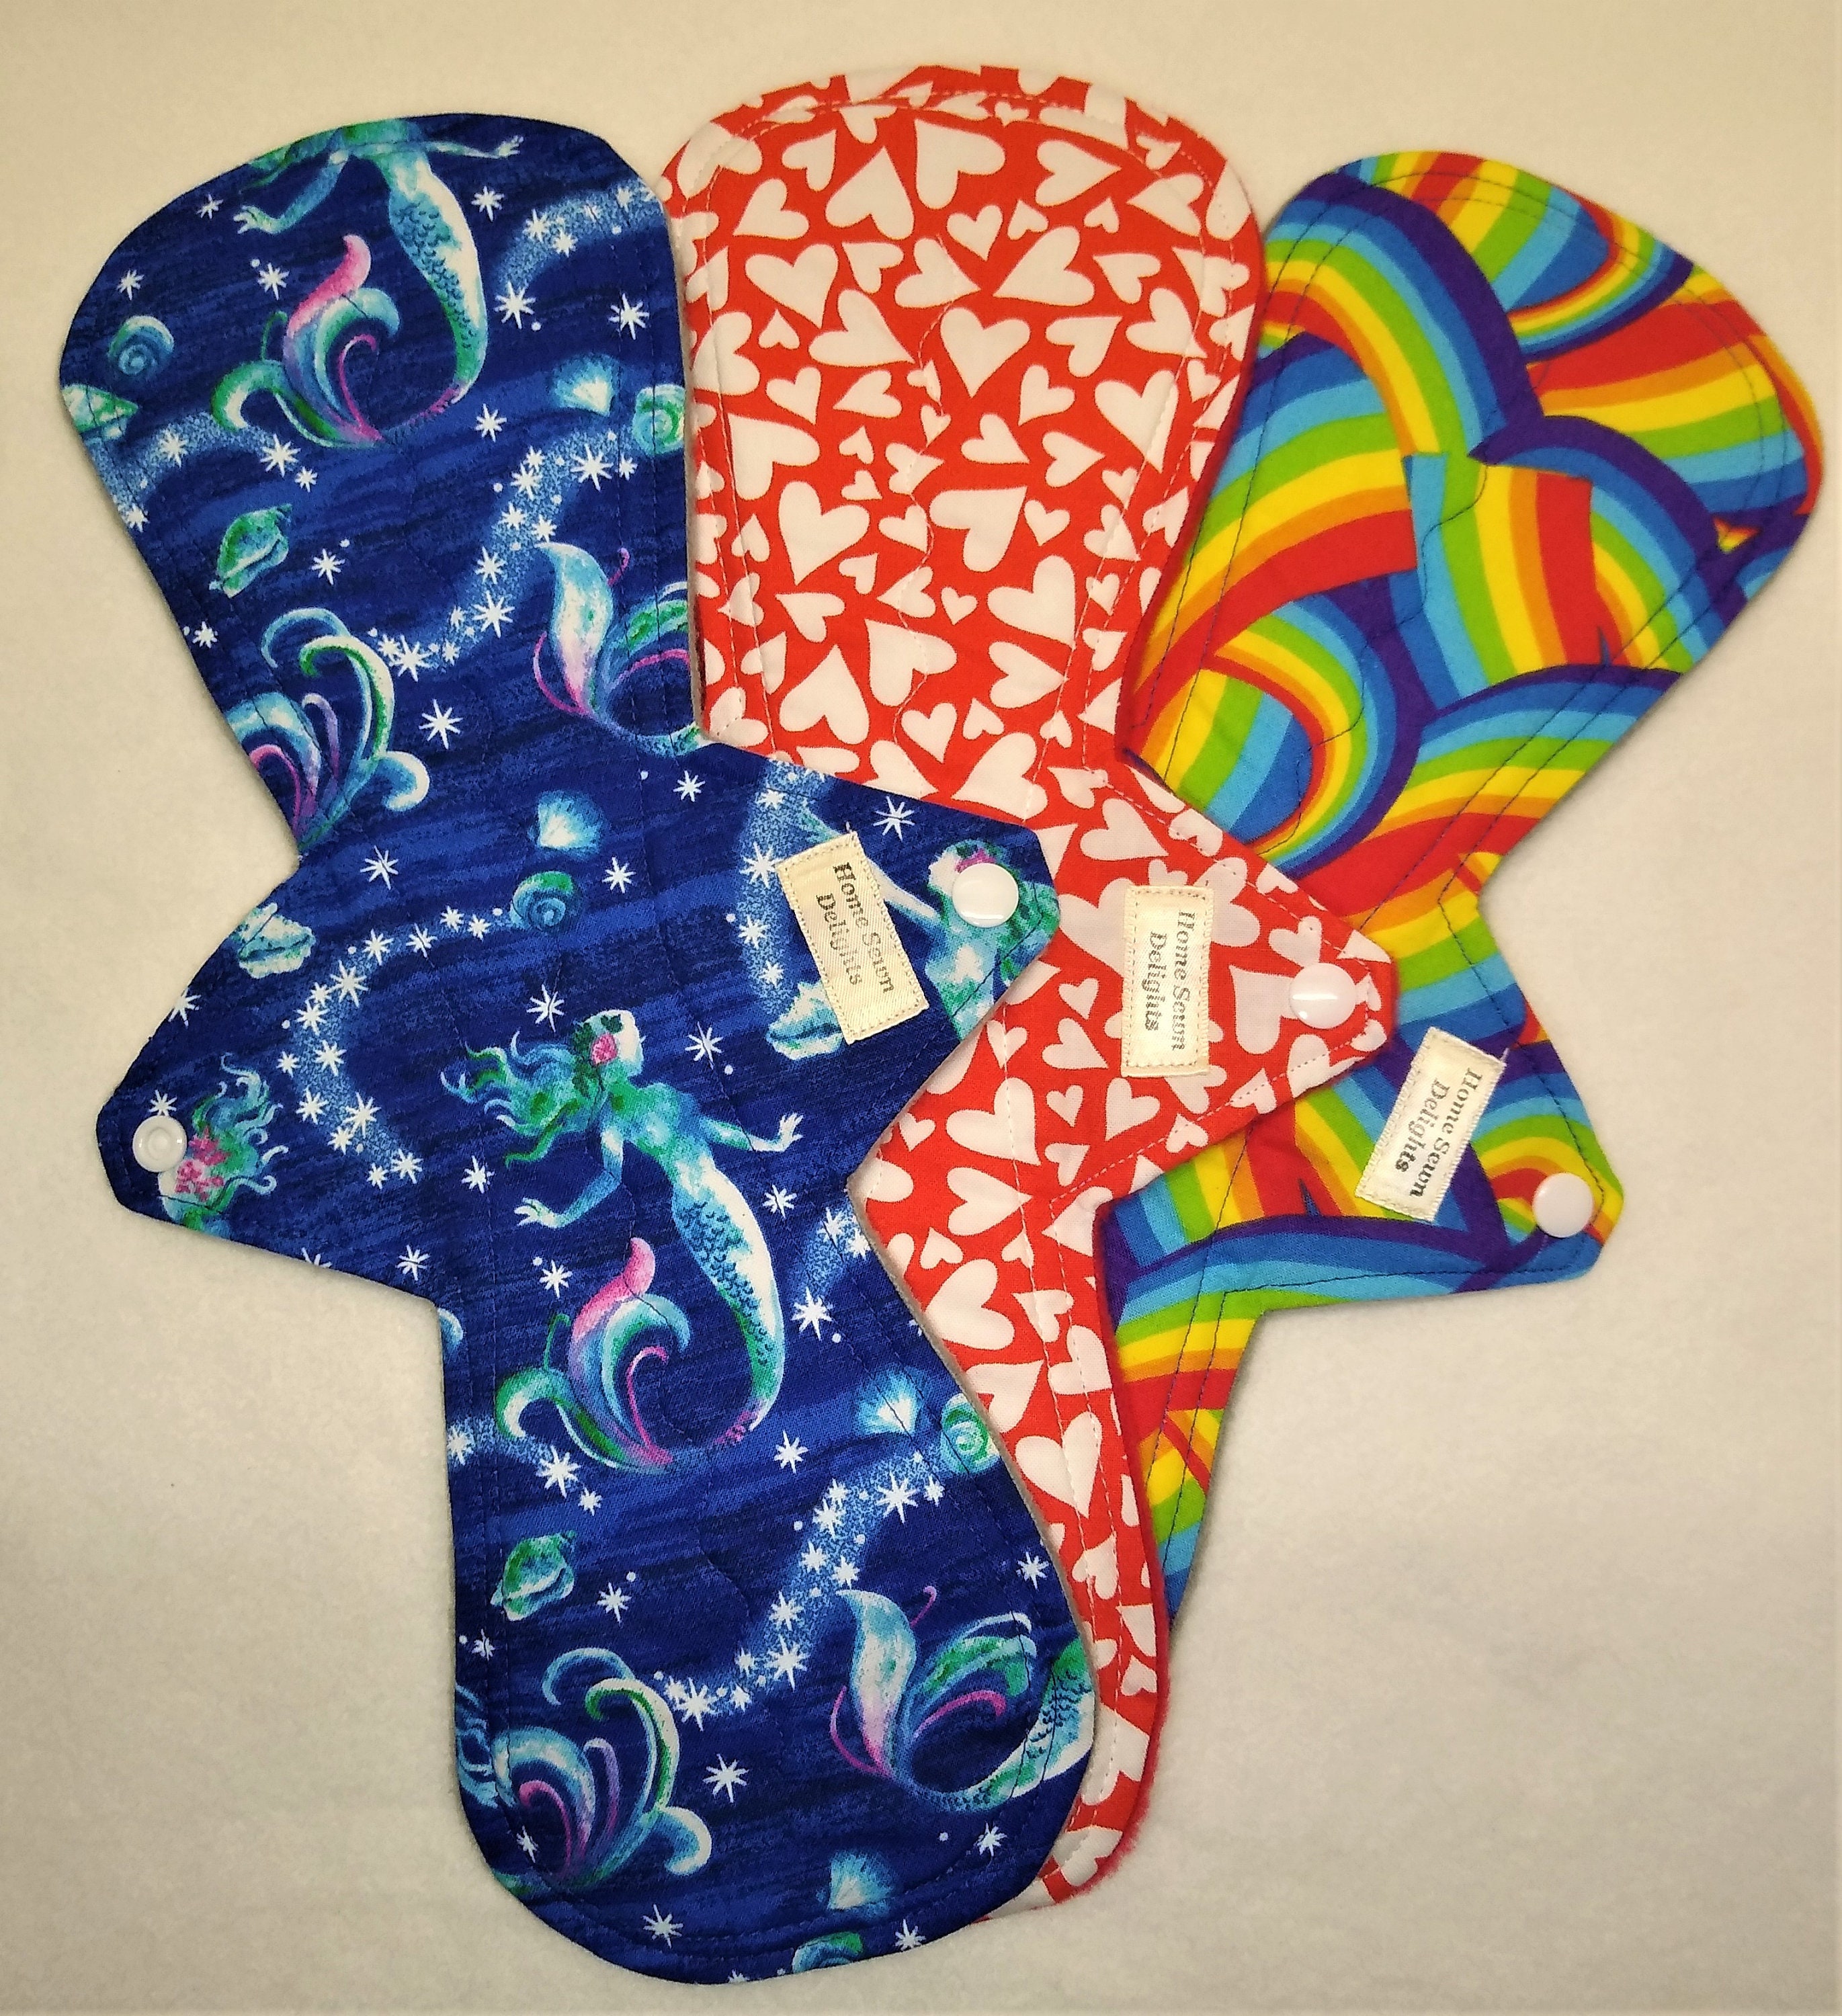 Zorb - What is it? – norma-may-cloth-pads